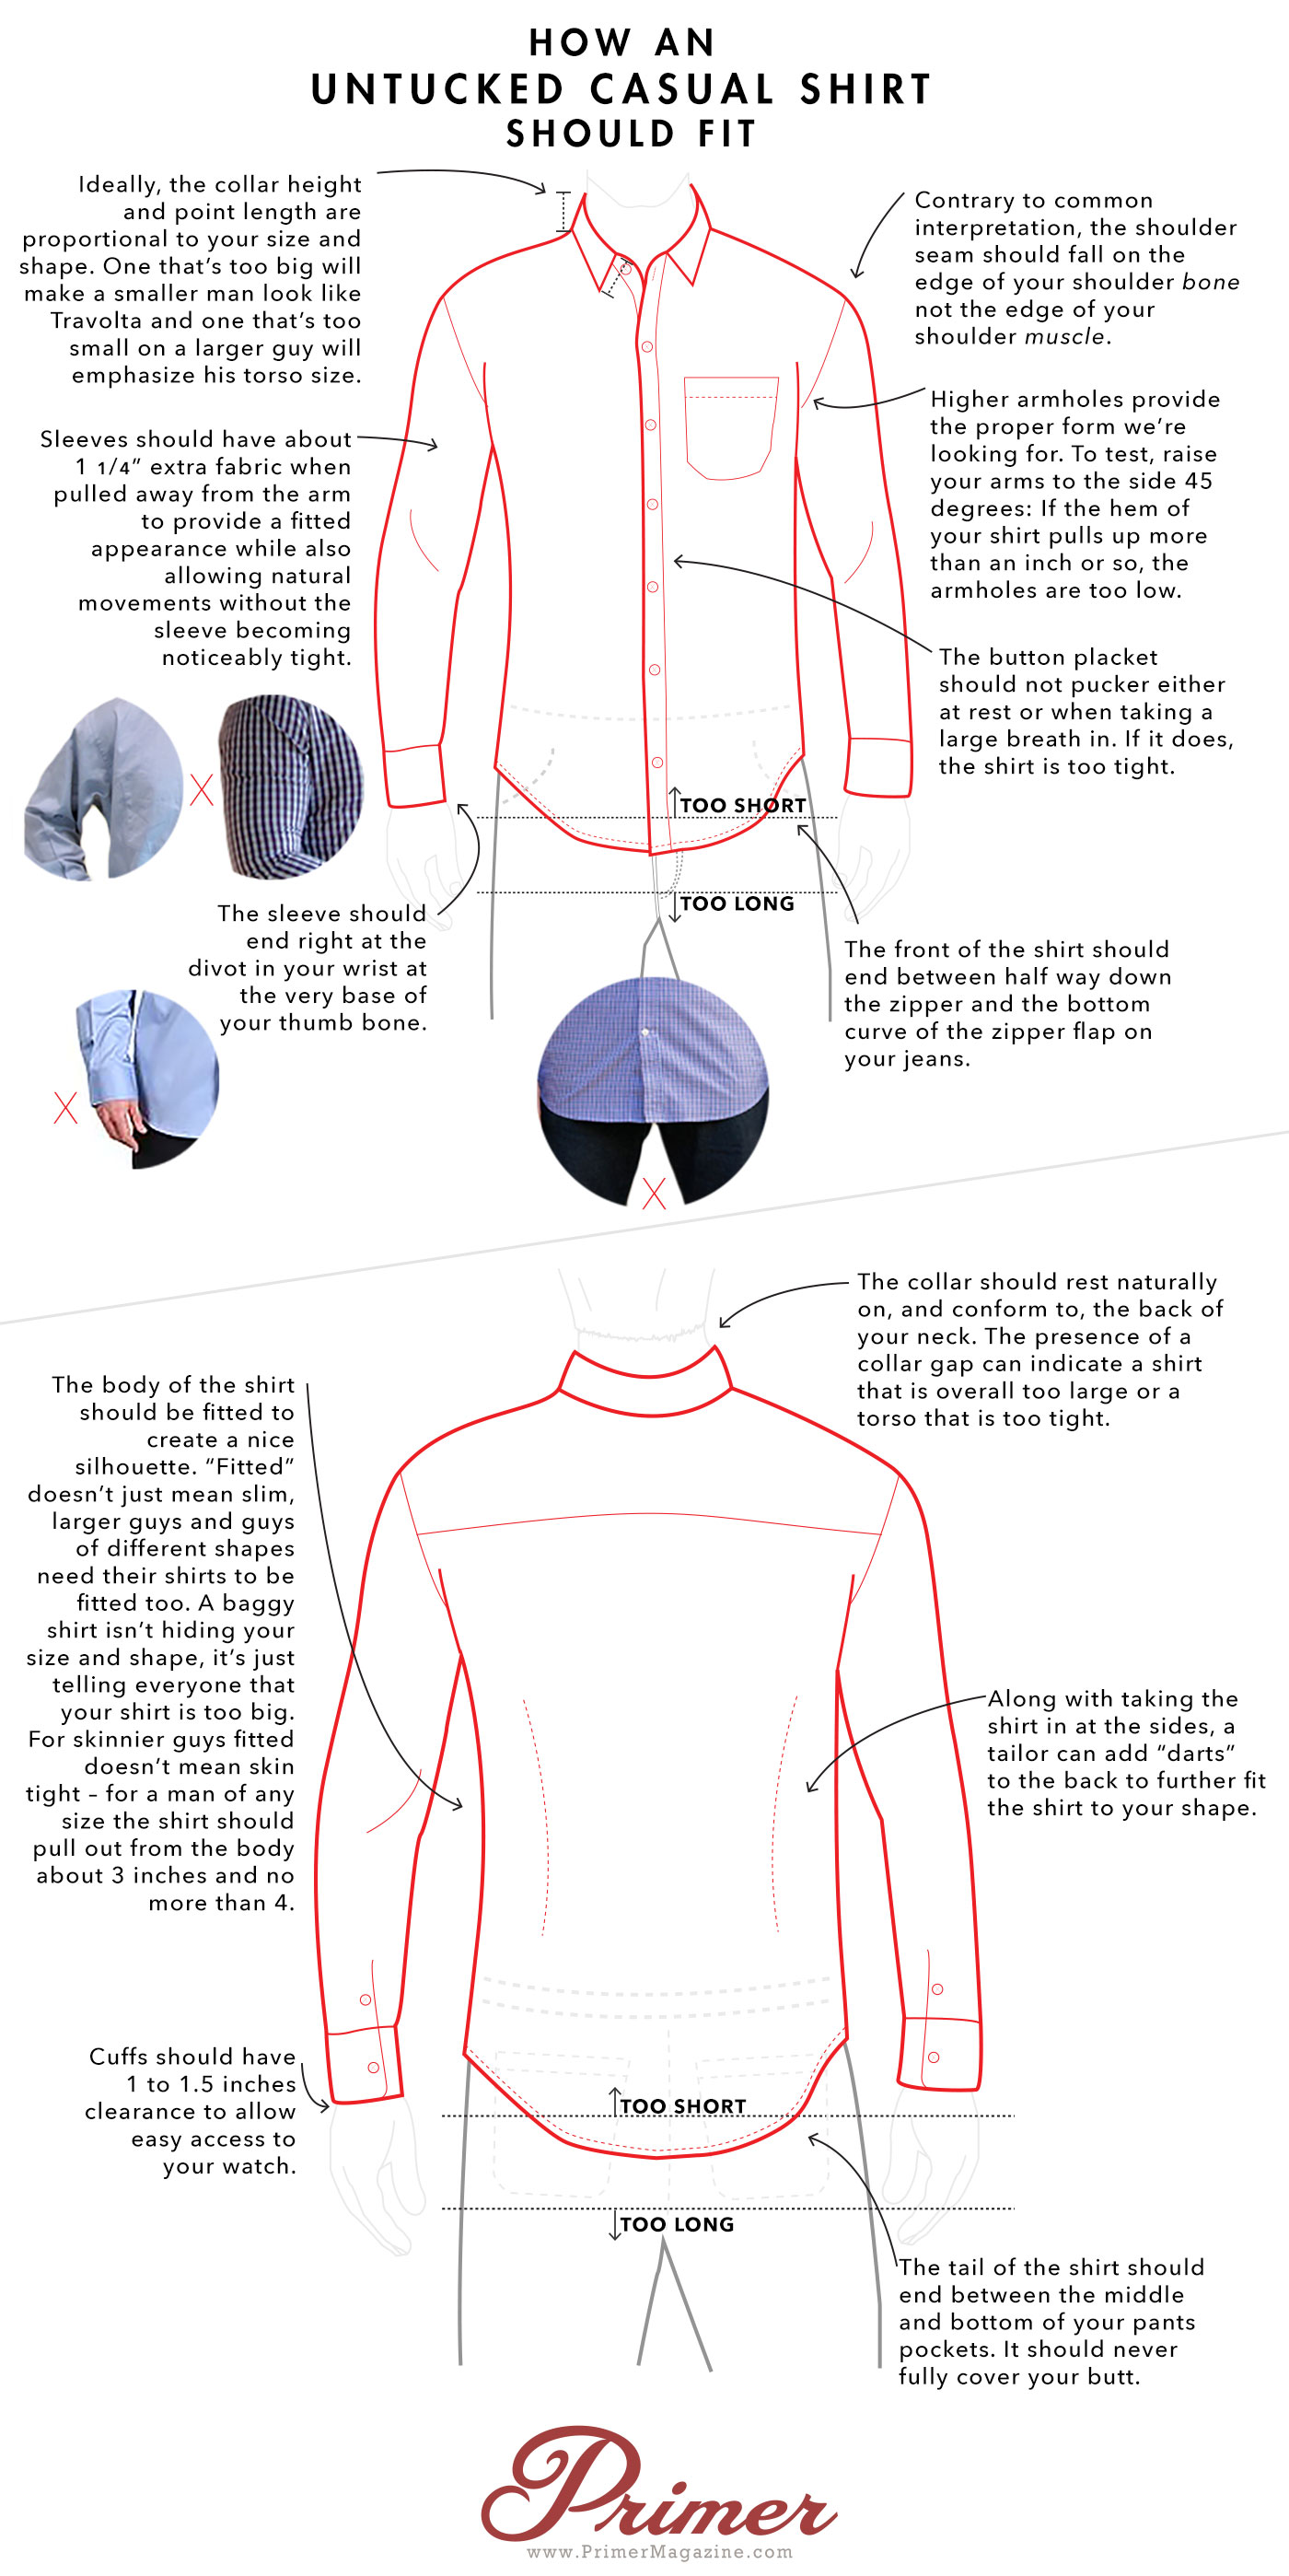 How an Untucked Casual Shirt Should Fit - A Visual Guide | Primer1400 x 2797